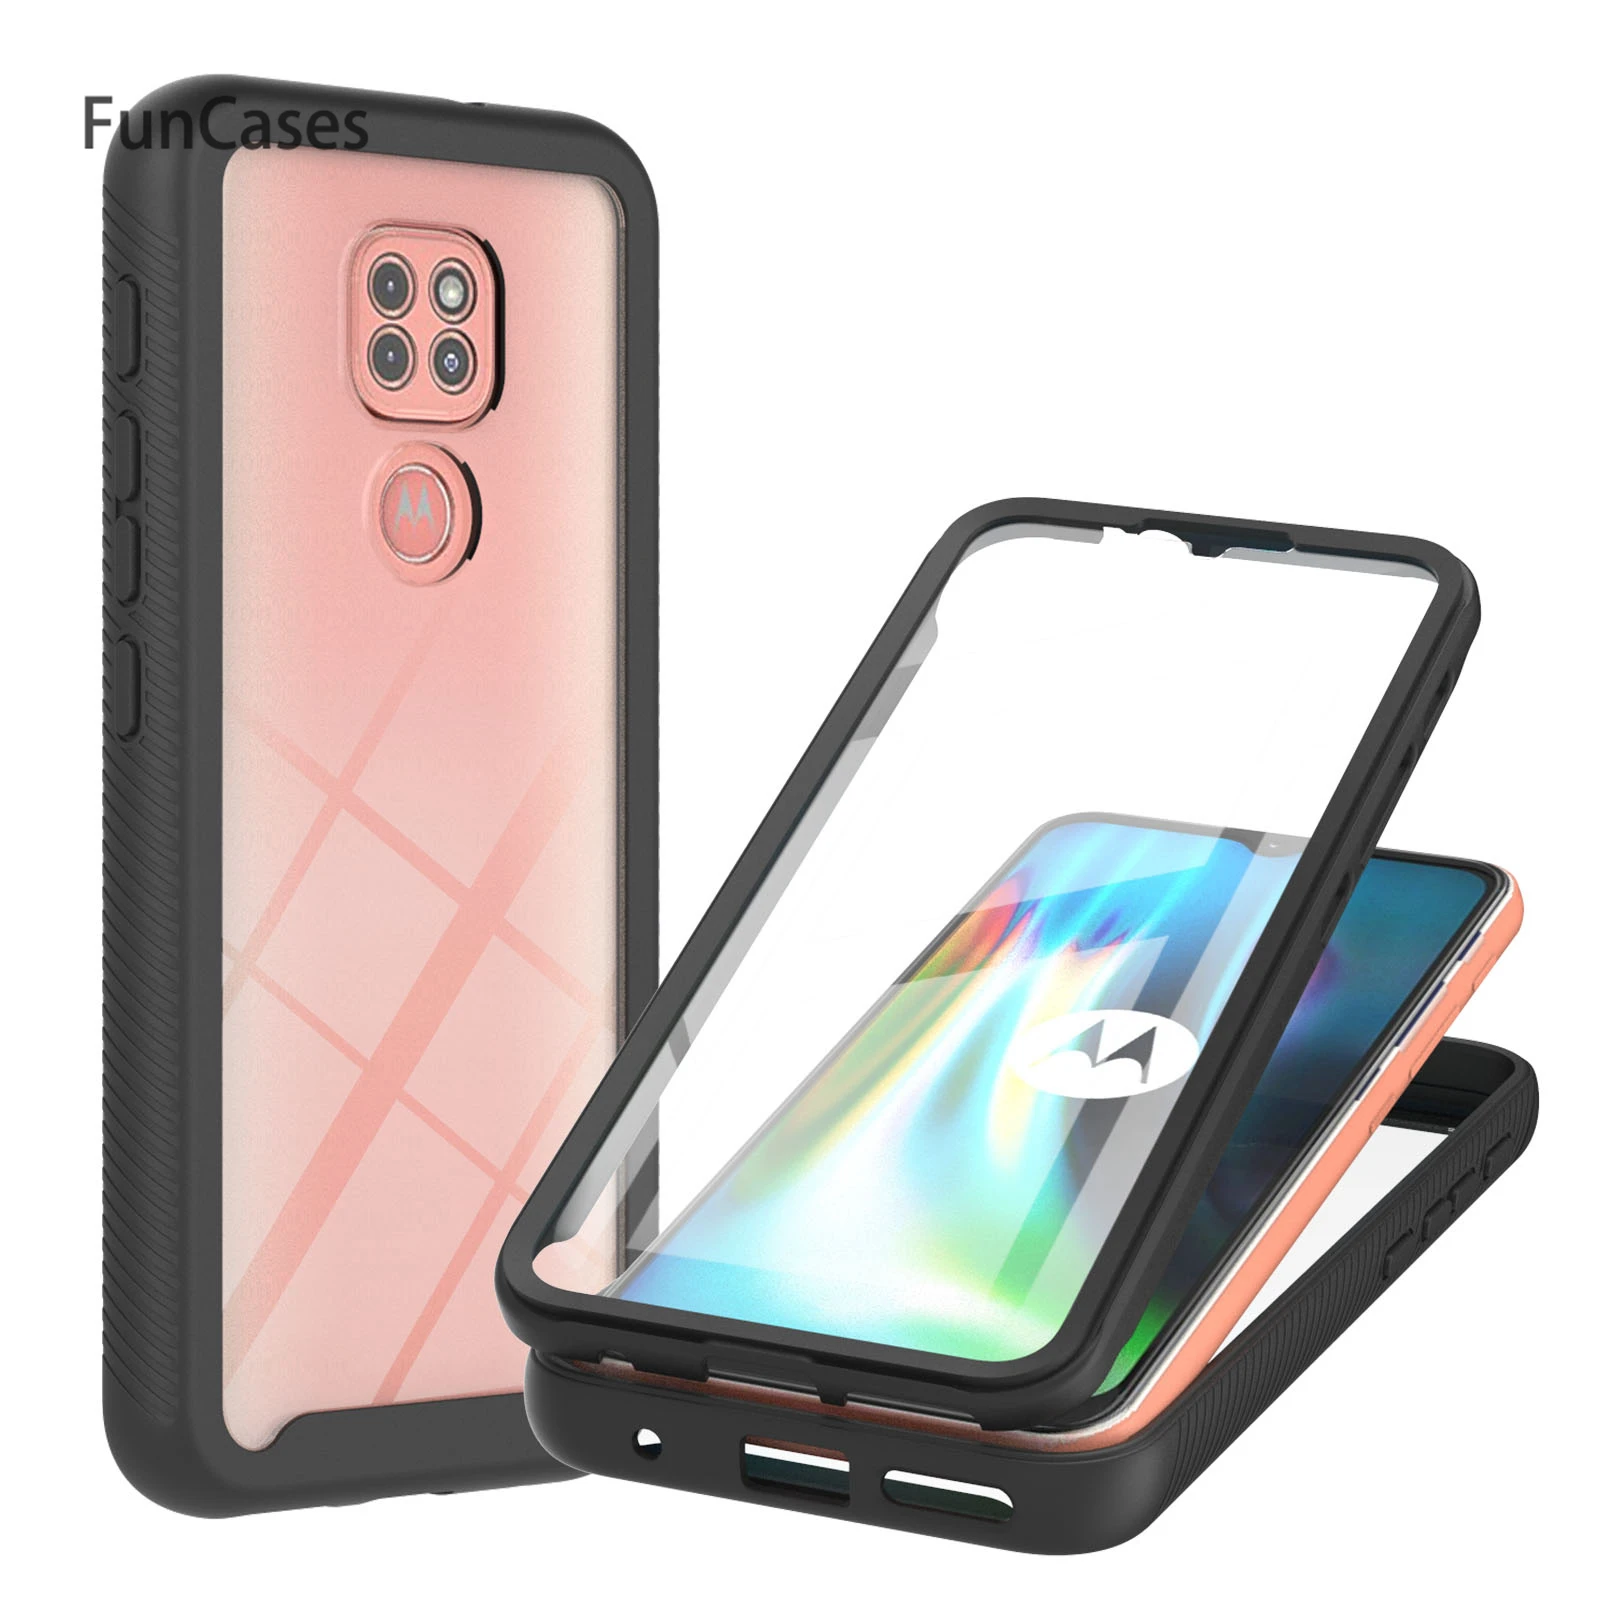 overhead radar Brochure Luxury Mirror Cases For hoesje Motorola Moto G9 Play Carcasa Frame And  Phone Back Case sFor Capa Motorola cover E7 Plus Pouch|Phone Pouches| -  AliExpress